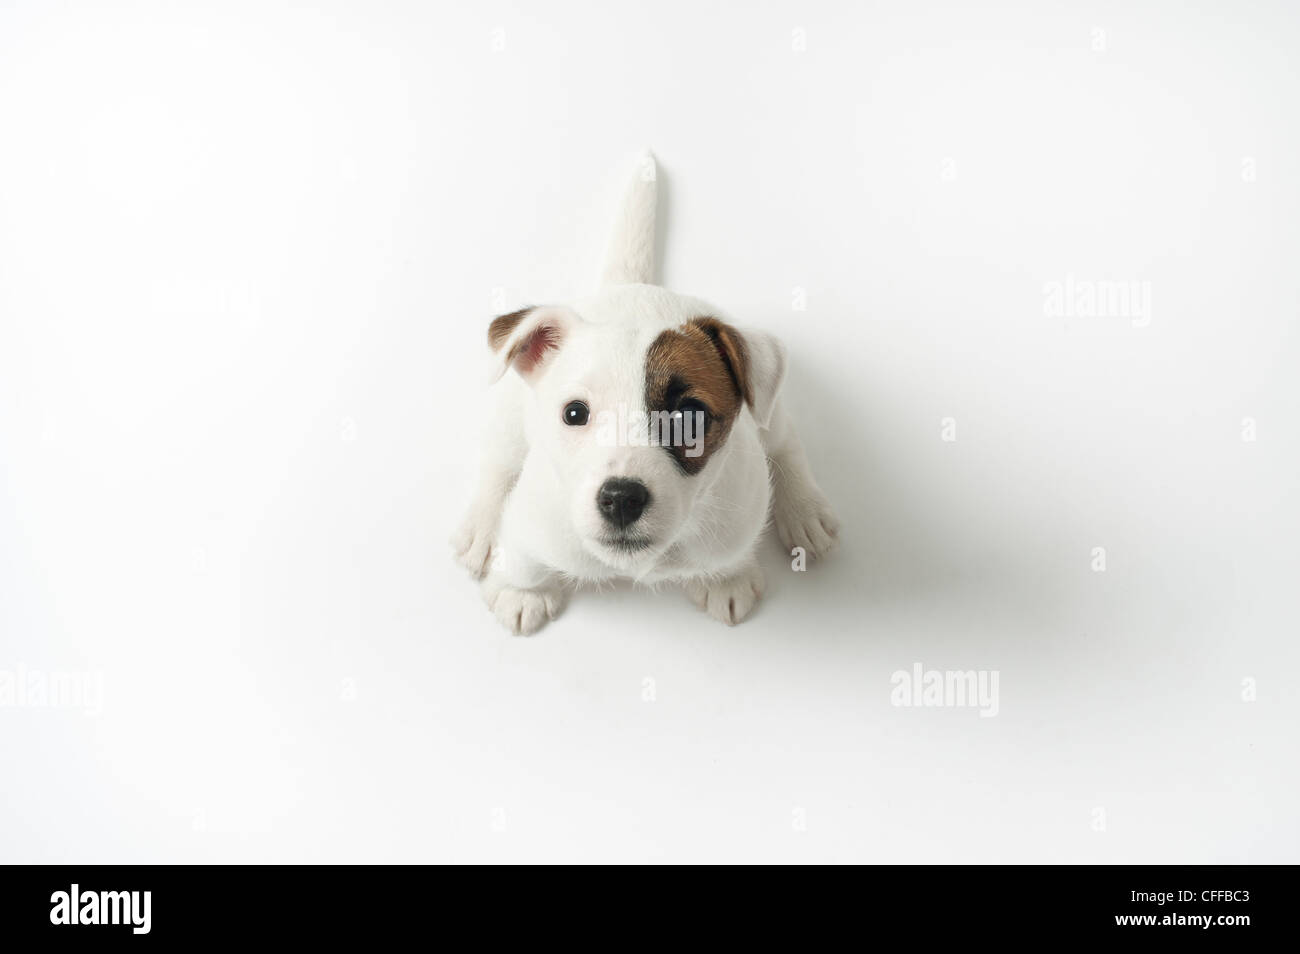 Jack Russell puppy looking up. Stock Photo